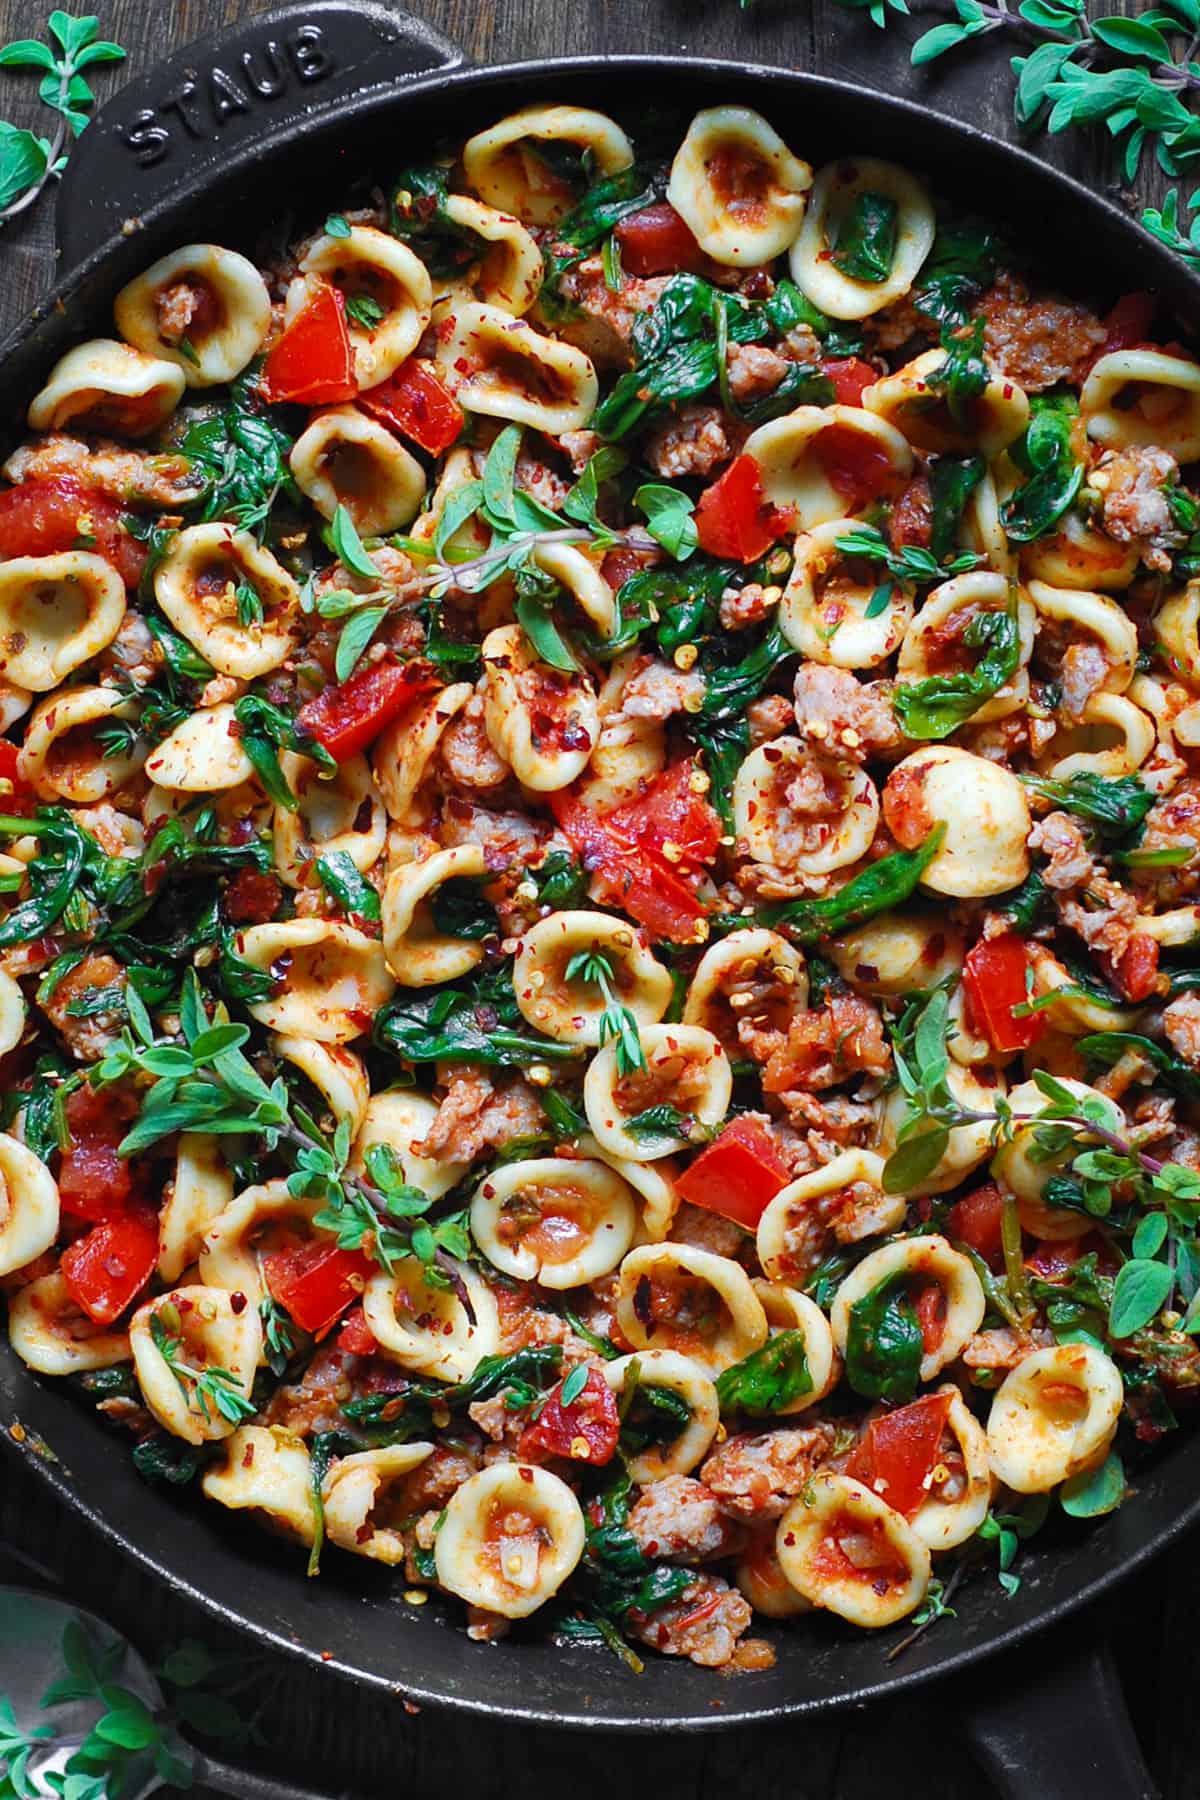 sausage orecchiette with spinach and tomatoes in a cast iron skillet.